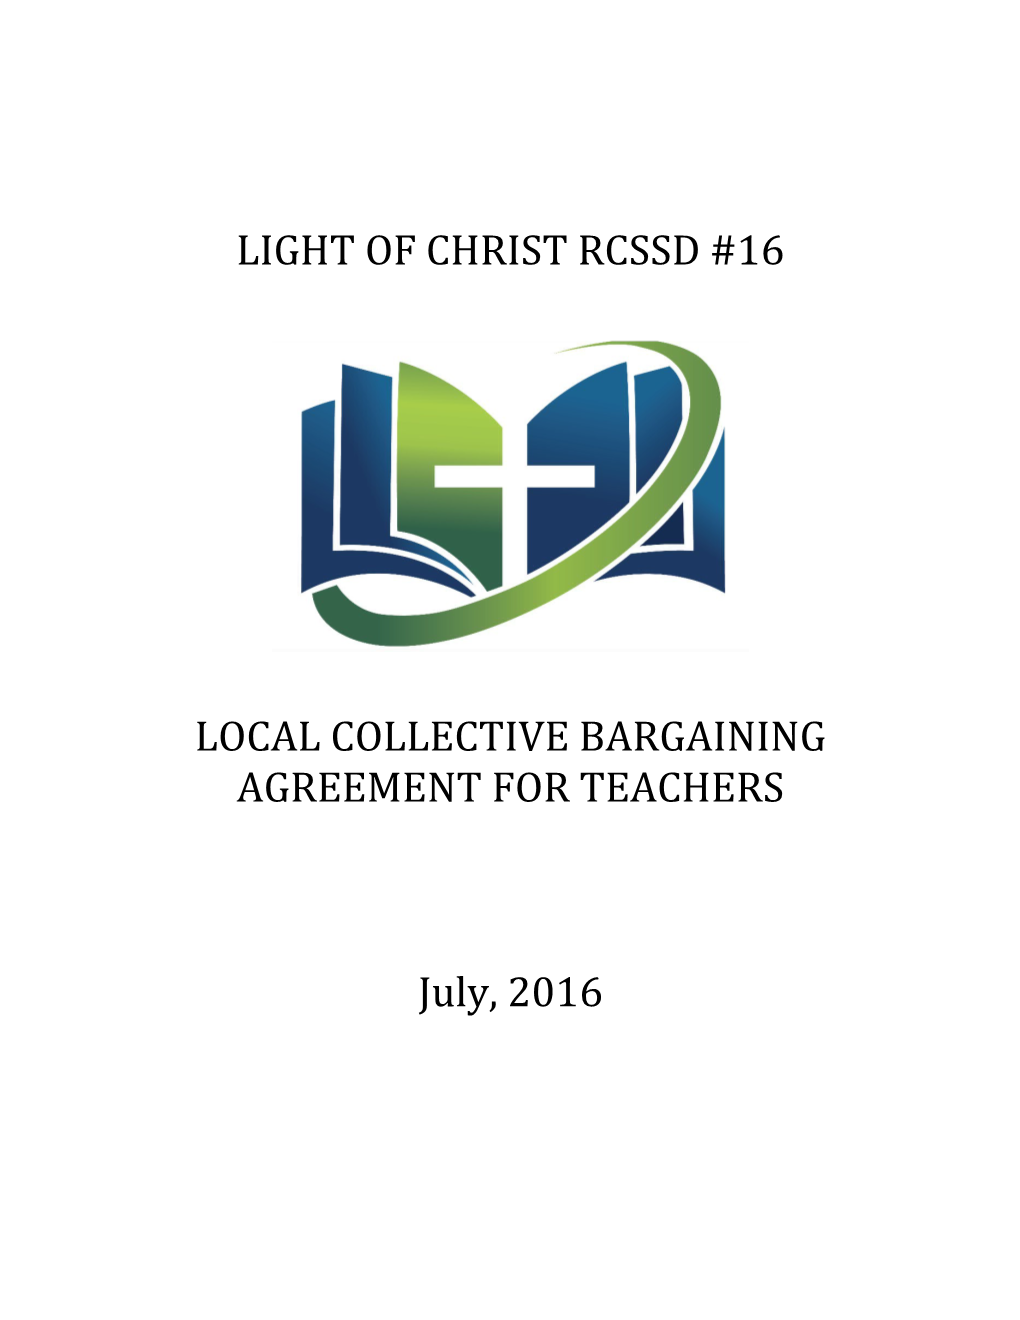 Local Collective Bargaining Agreement for Teachers